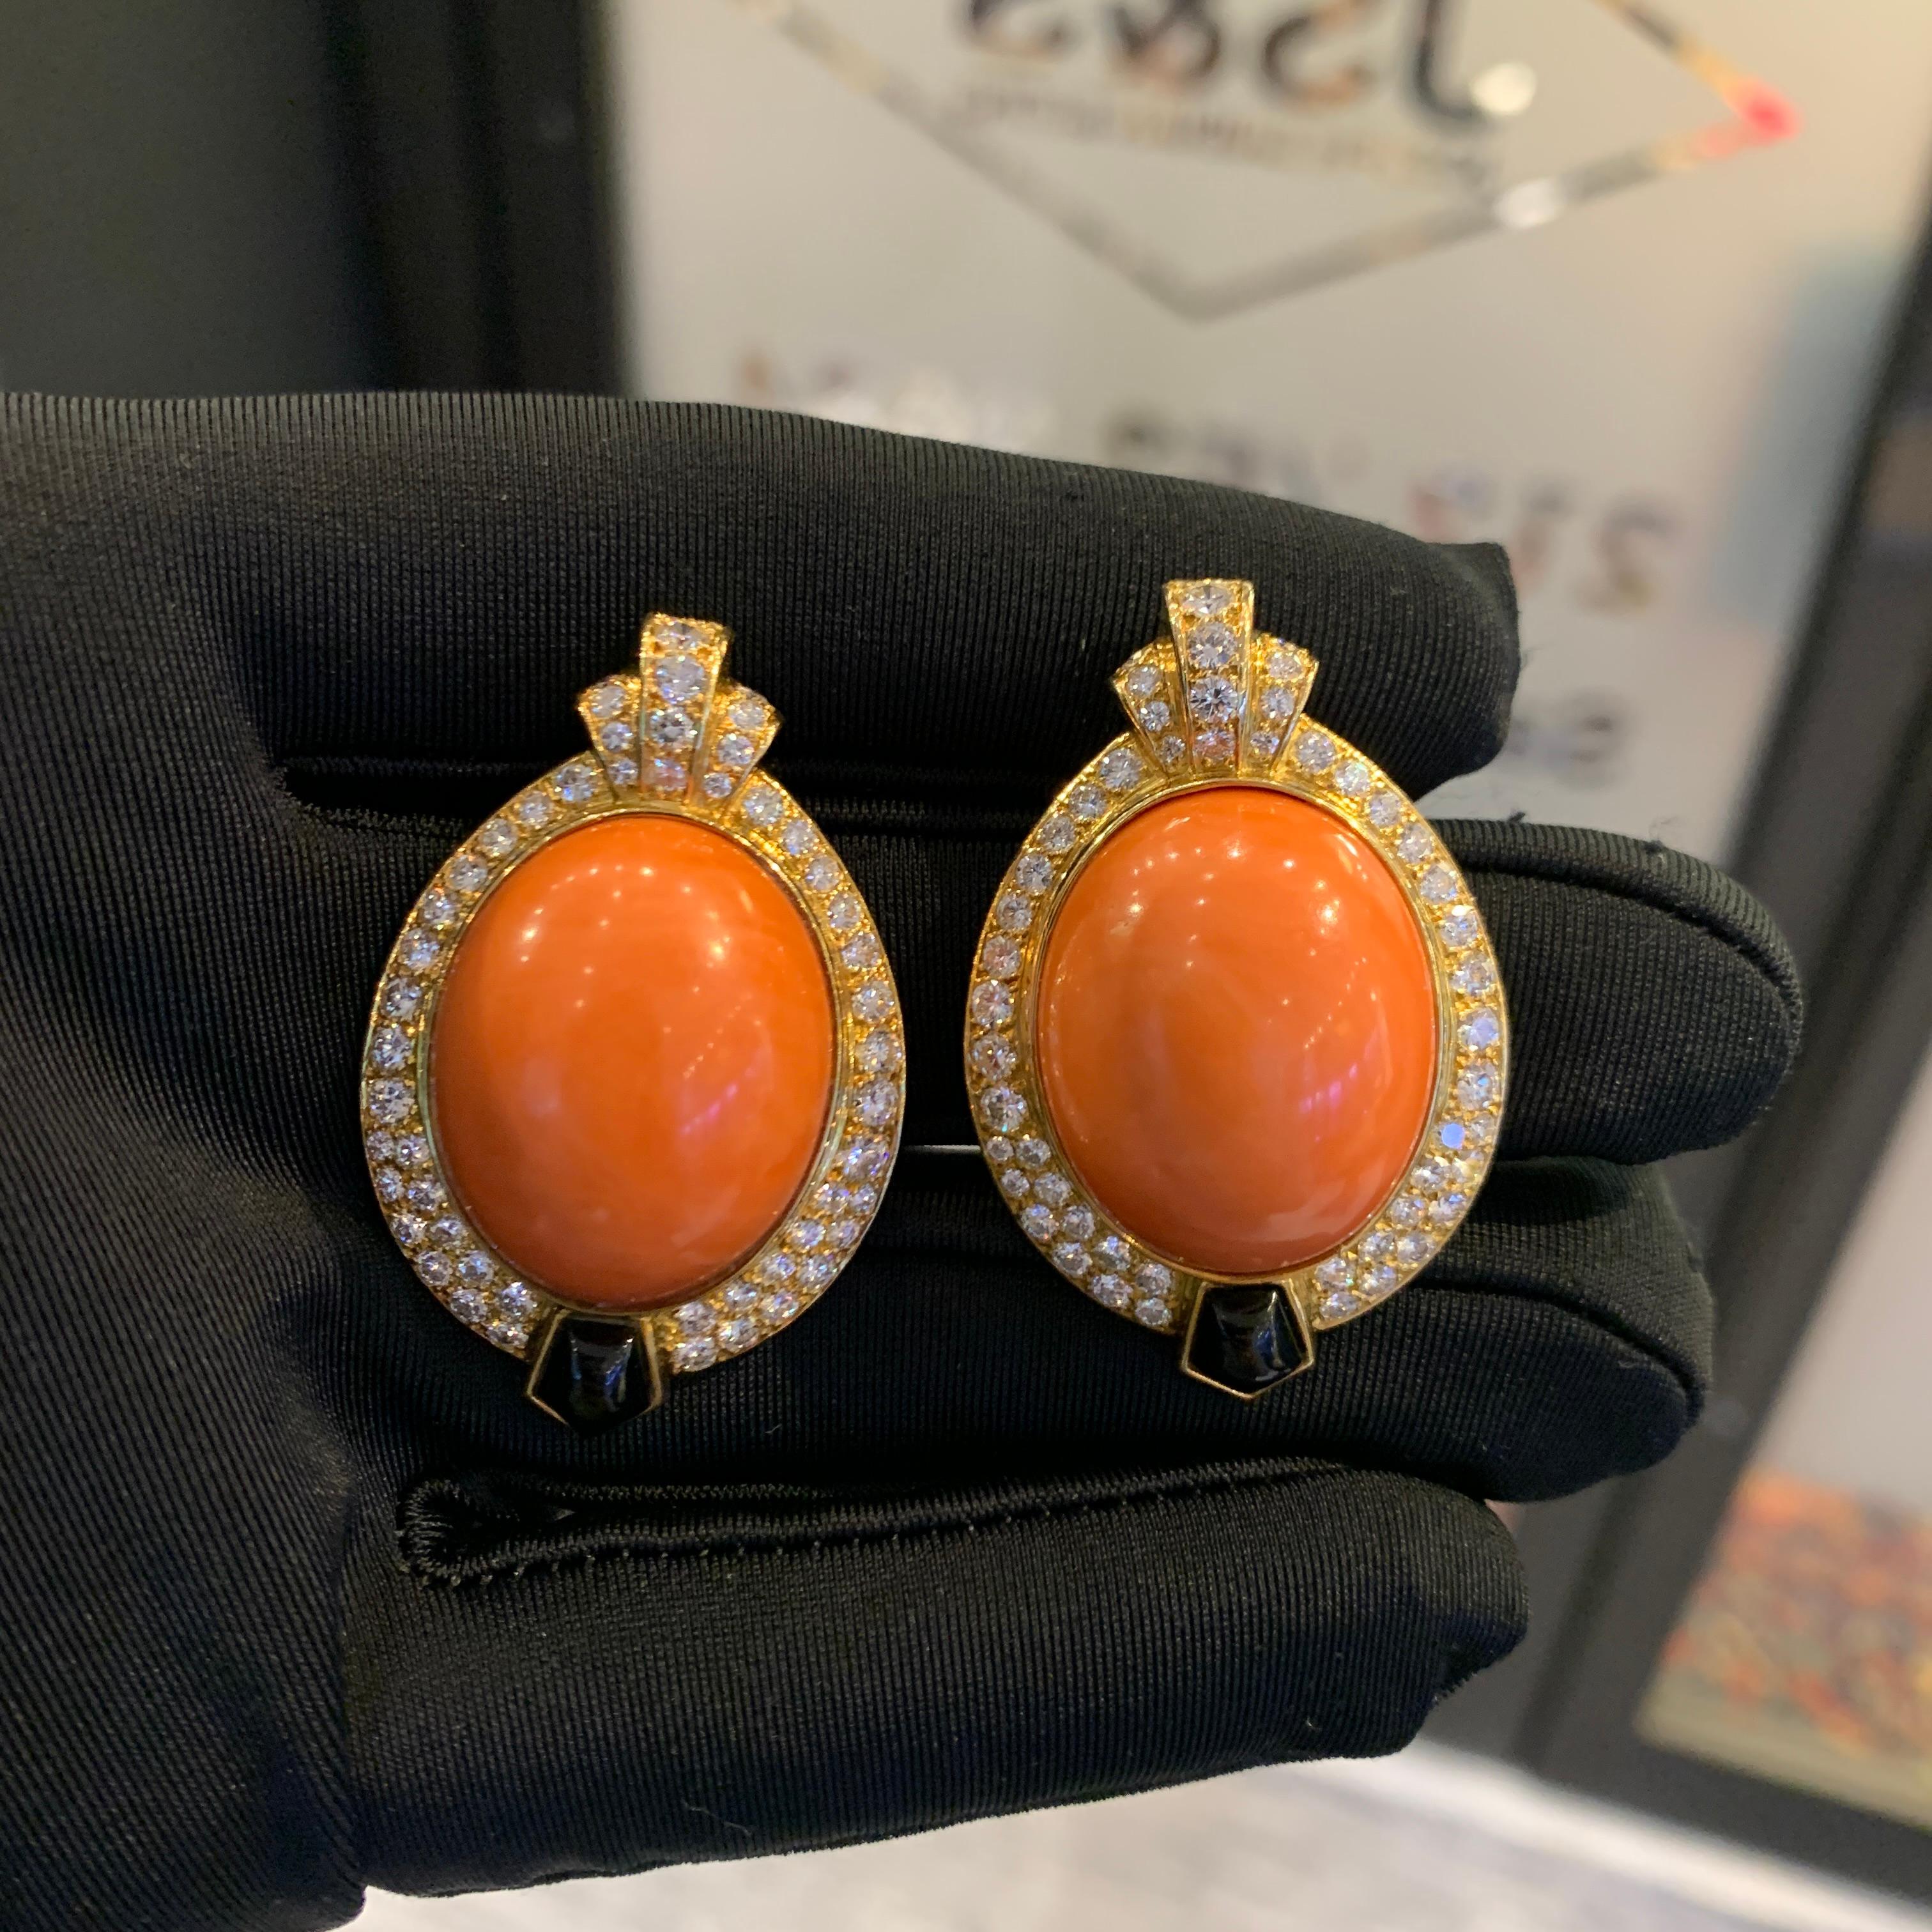 Cartier Egyptian Revival Coral Diamond & Onyx Earrings For Sale 1